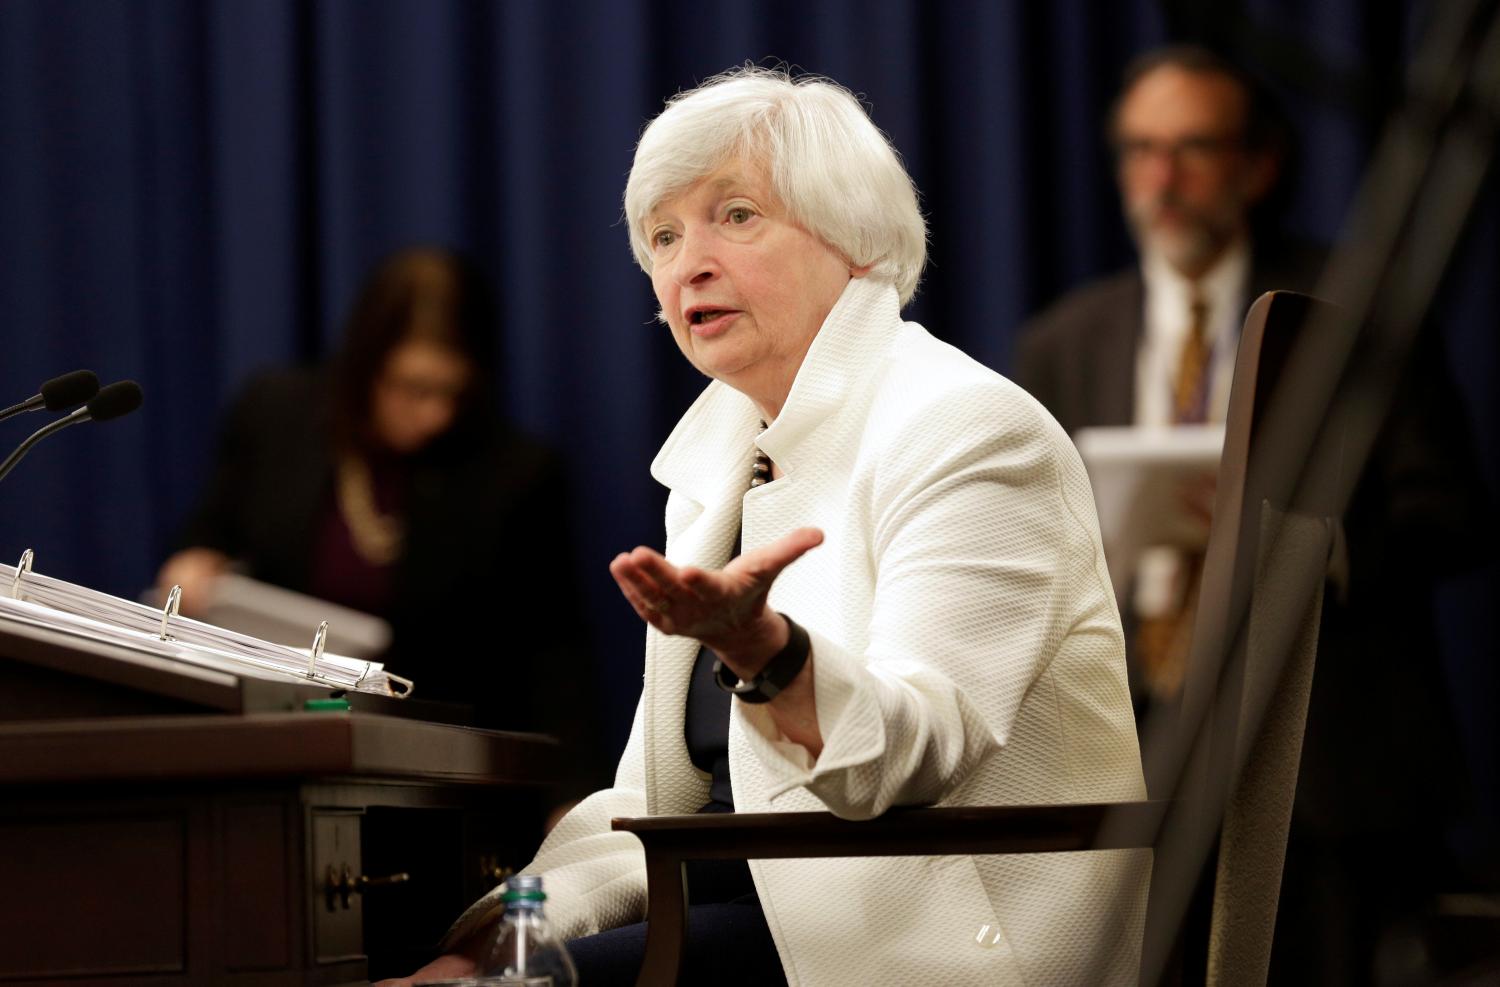 Federal Reserve Chairman Janet Yellen speaks during a news conference after a two-day Federal Open Markets Committee (FOMC) policy meeting in Washington, U.S., September 20, 2017. REUTERS/Joshua Roberts - RC152544FA20